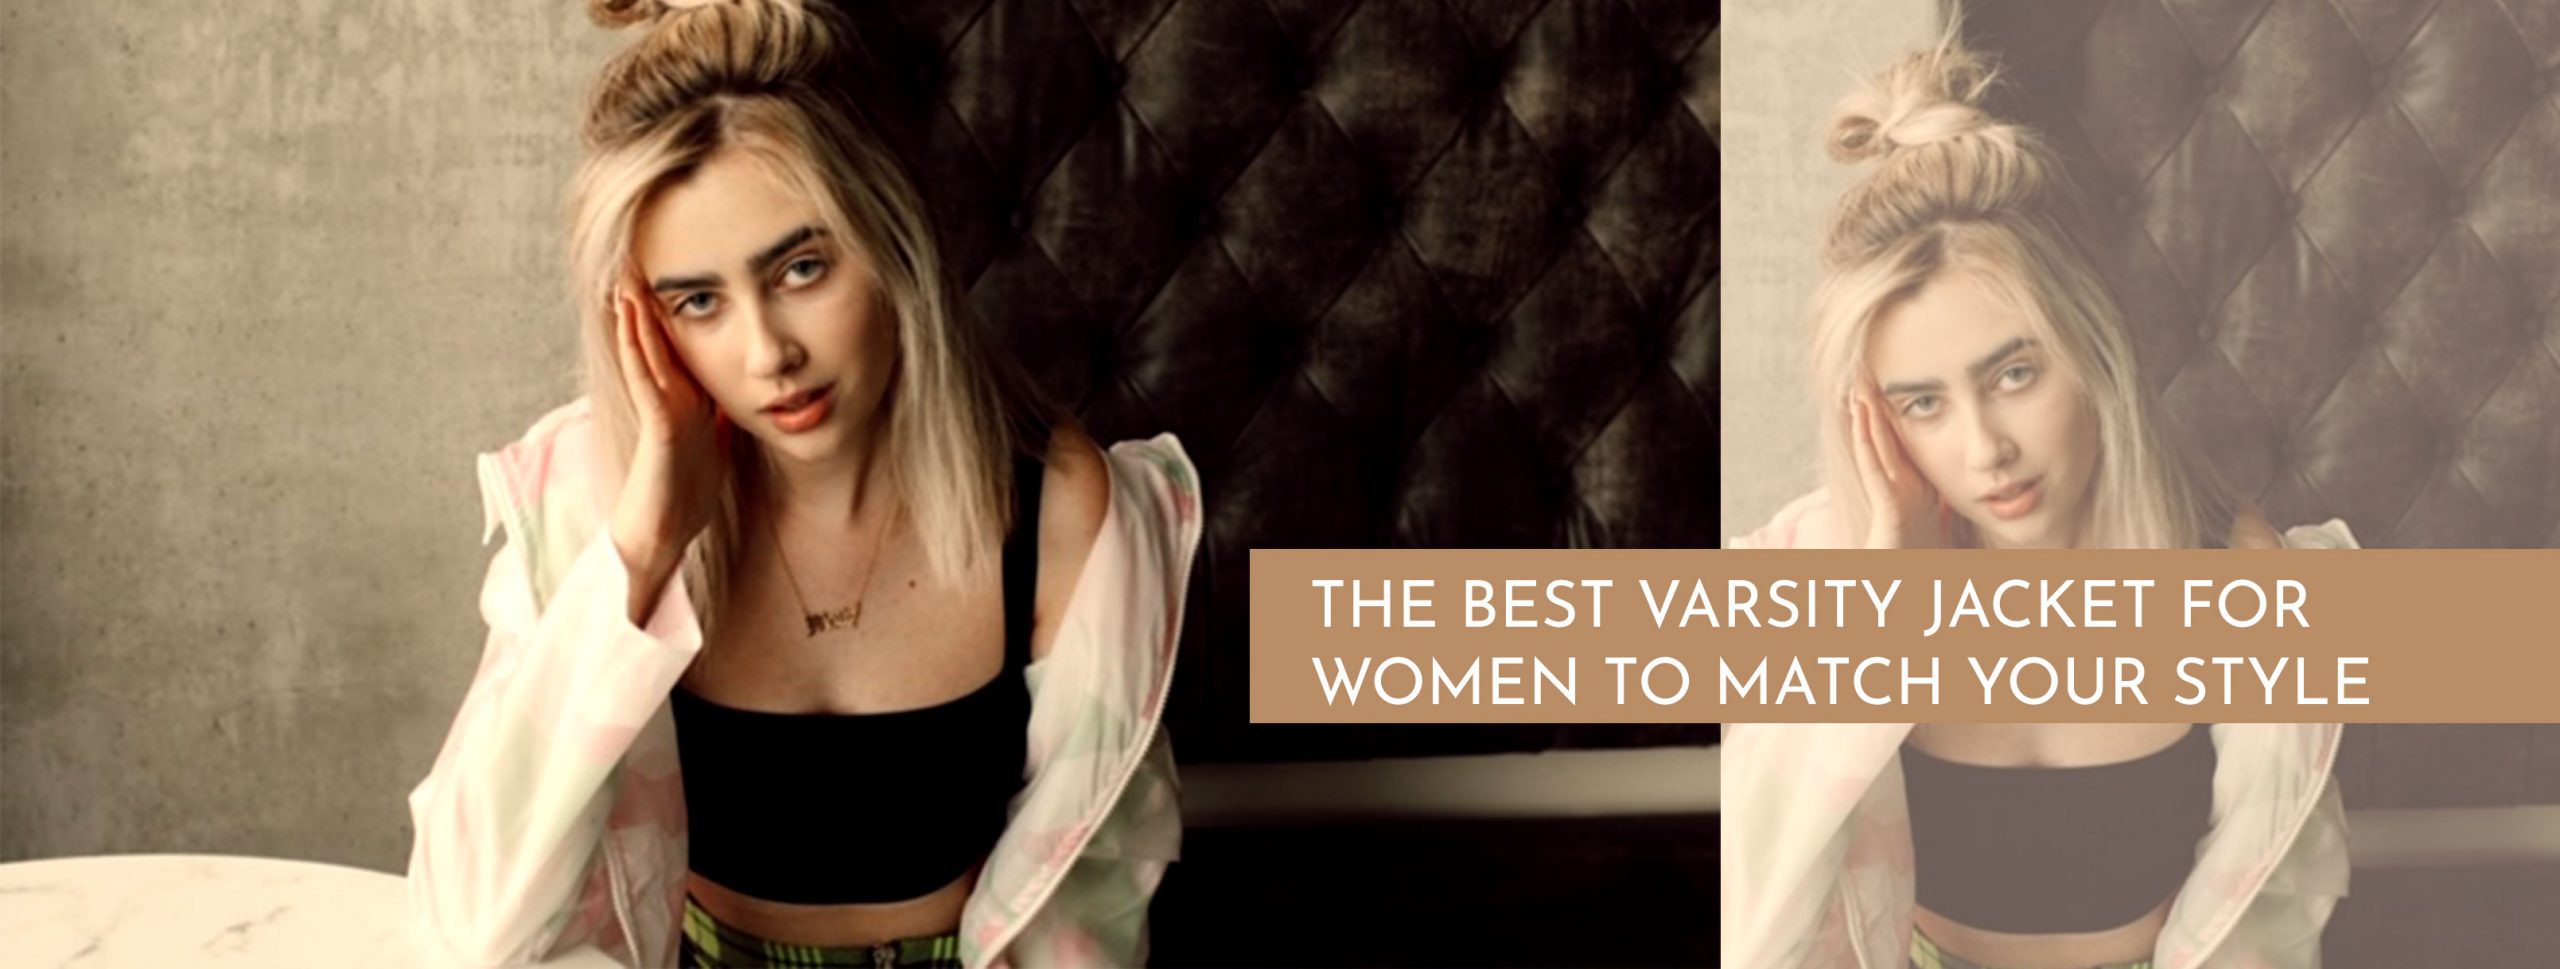 The Best Varsity Jacket For Women To Match Your Style: Women Fashion,  Stylish Teens Outfits  